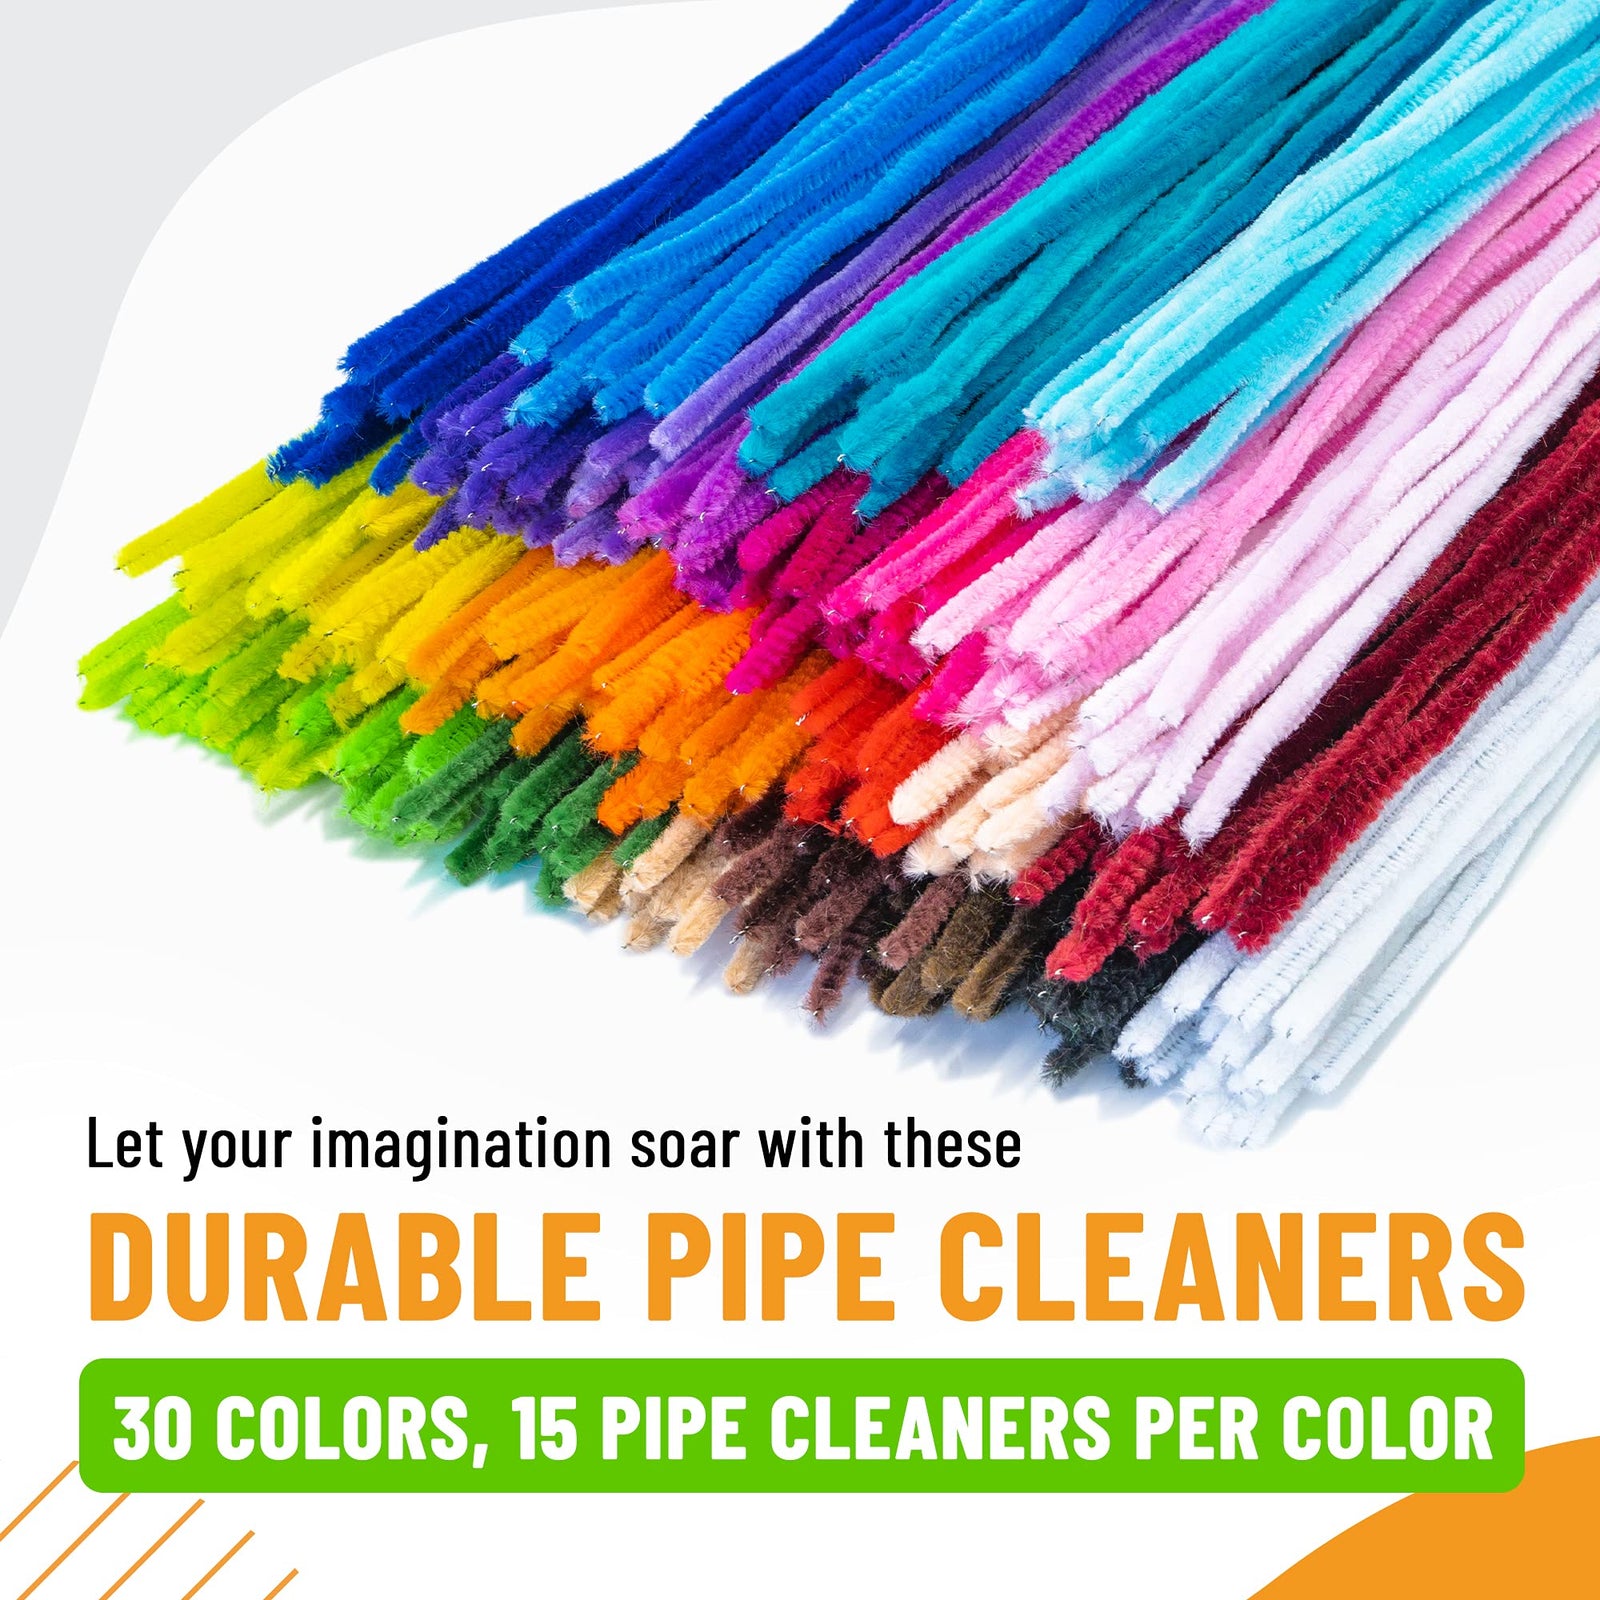 Home Pro Shop 350 Pieces Pipe Cleaners for Craft Supplies - Soft Bristle, Flexible & Durable Pipe Cleaner for Crafts, Fun Creative DIY Ar, & Decorations - 6mm x 12inch Chenille Stems in 30 Colors